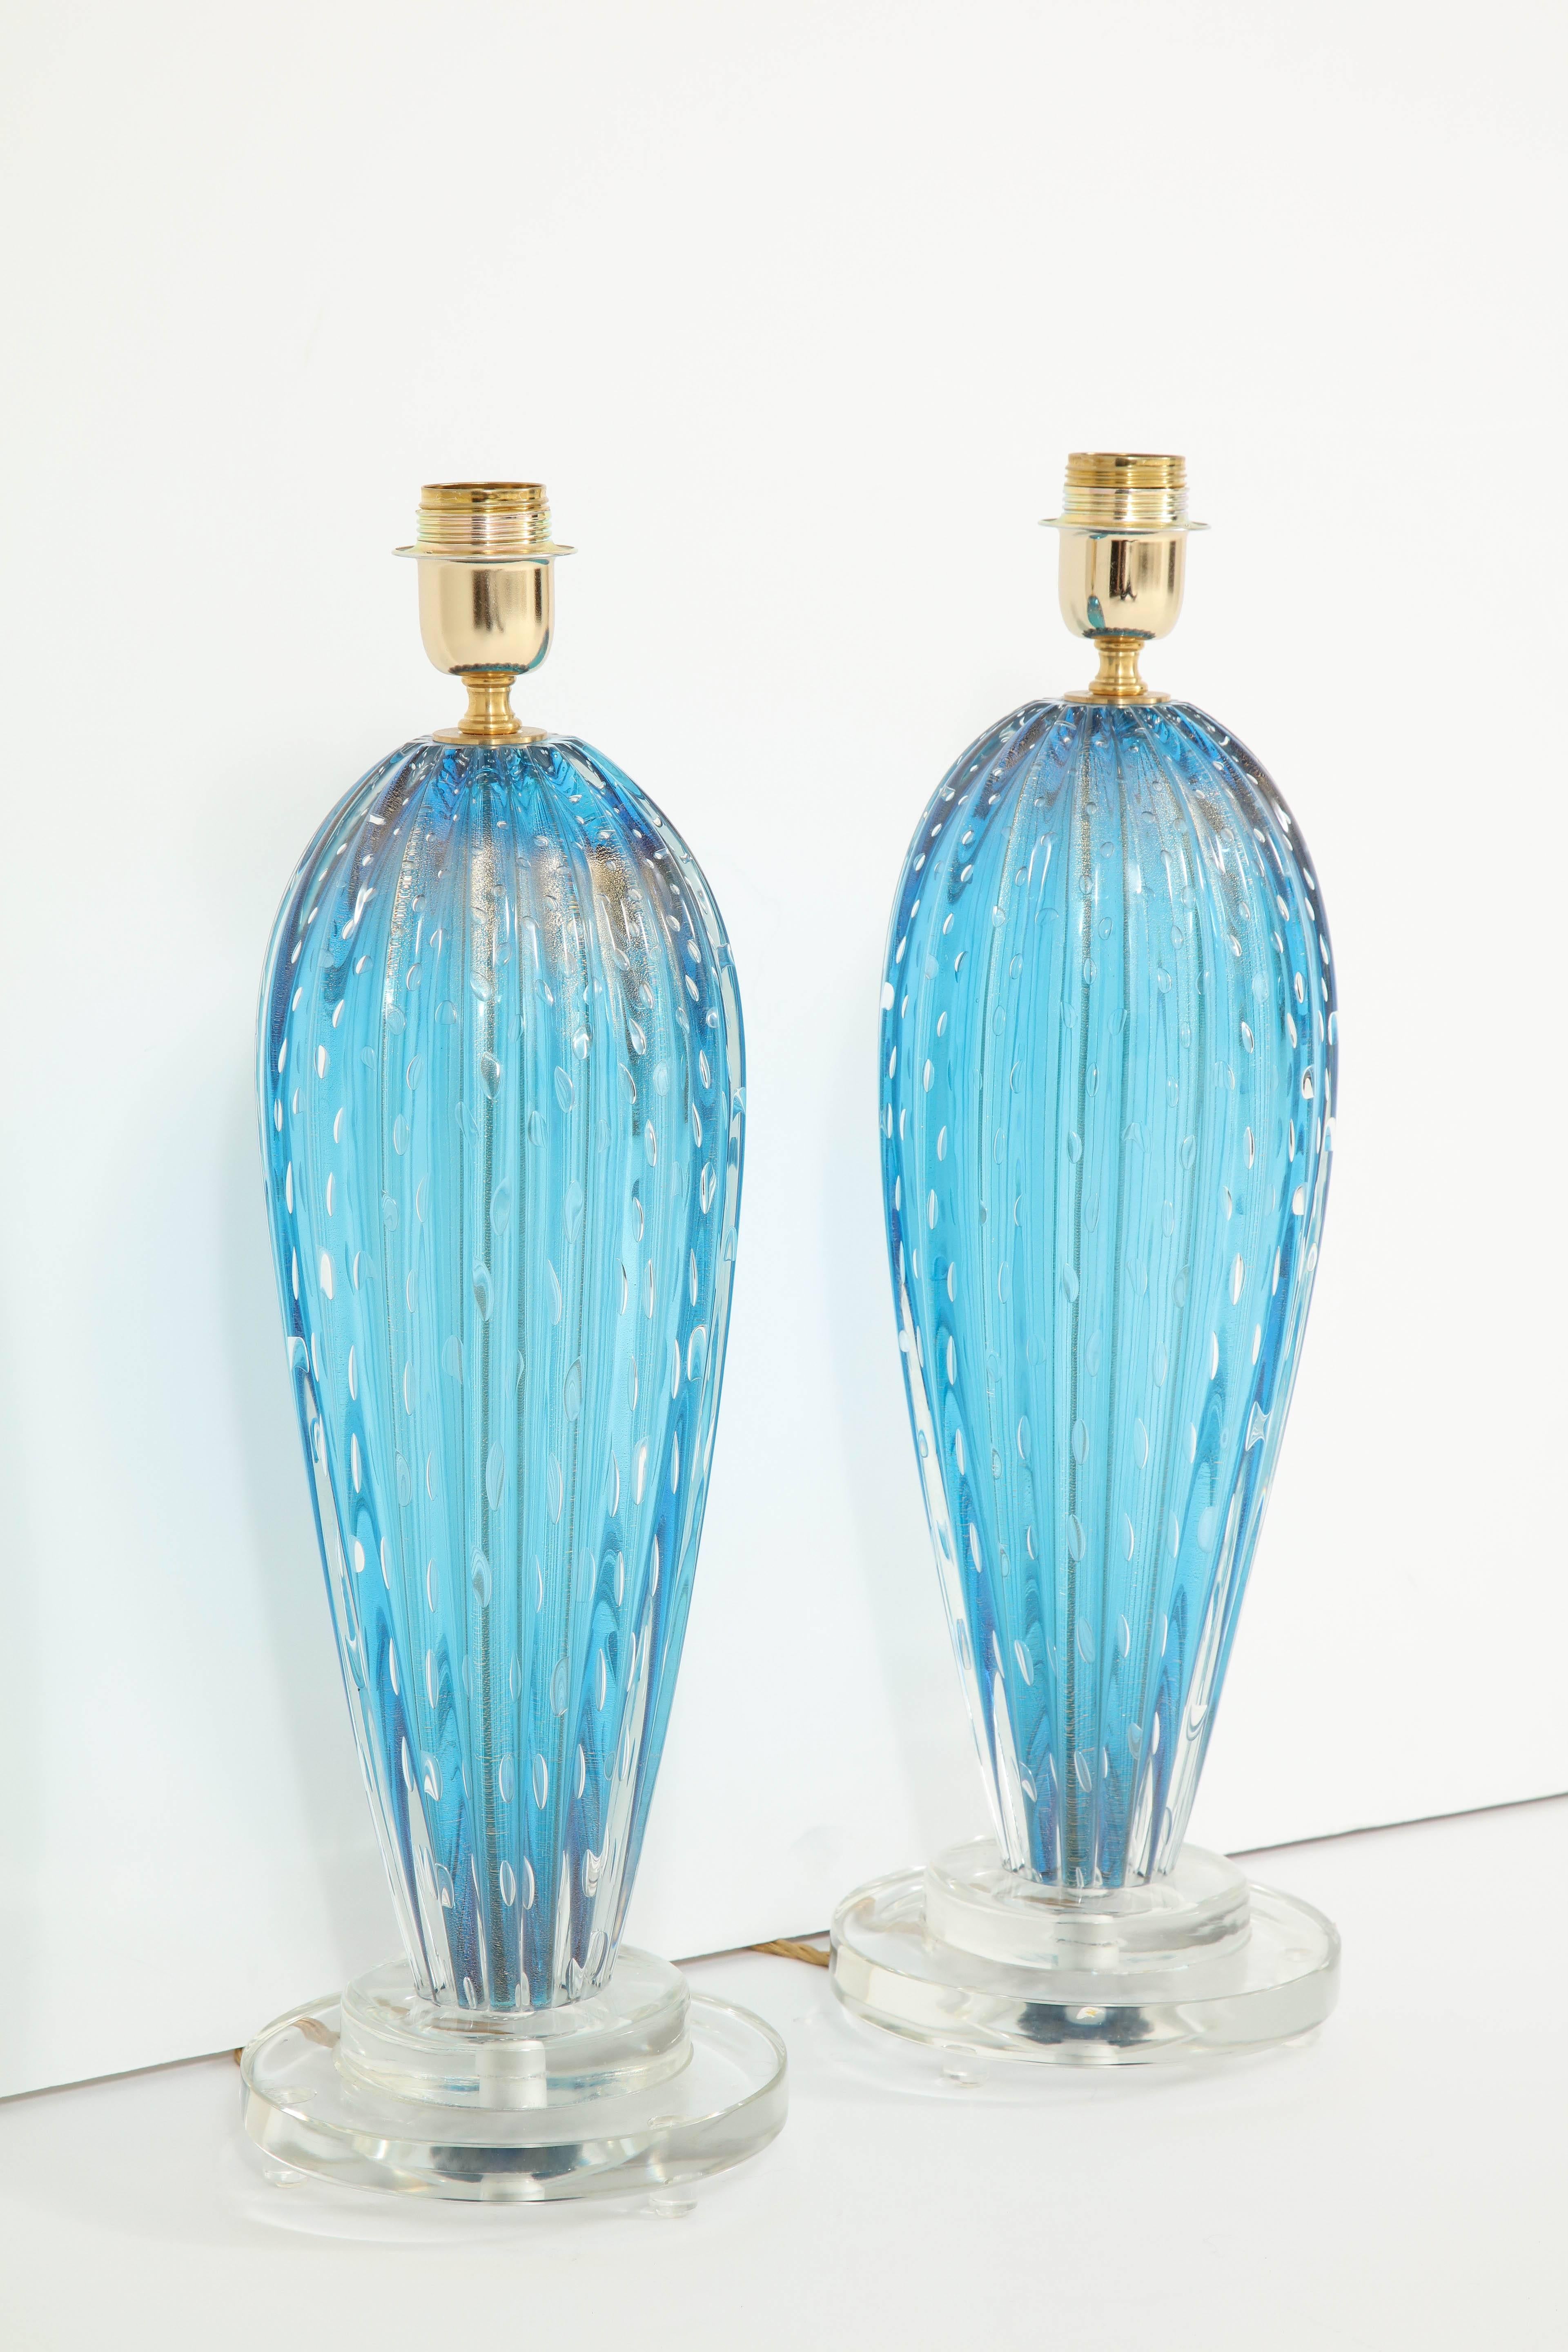 A pair of Murano blown glass lamps in a stunning shade of blue. The lamps were created using the Pulegoso technique, resulting in the appearance of small "bubbles." The base is solid, clear Murano glass.